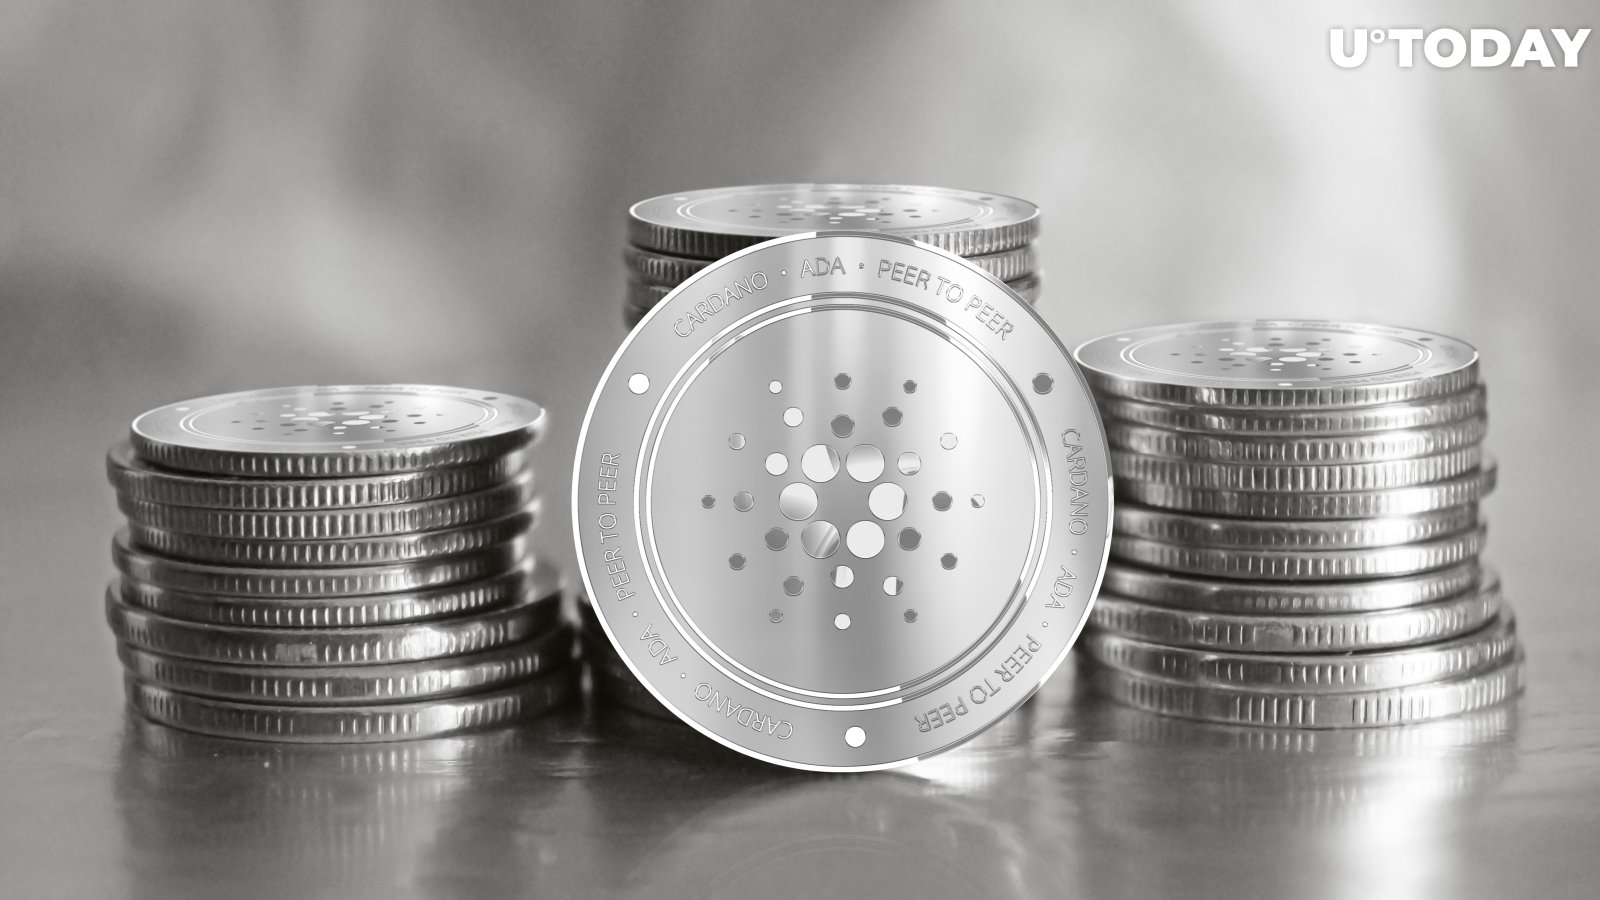 Cardano (ADA) Soars 17 Percent Ahead of Smart Contract Launch as Charles Hoskinson Takes Aim at Critics